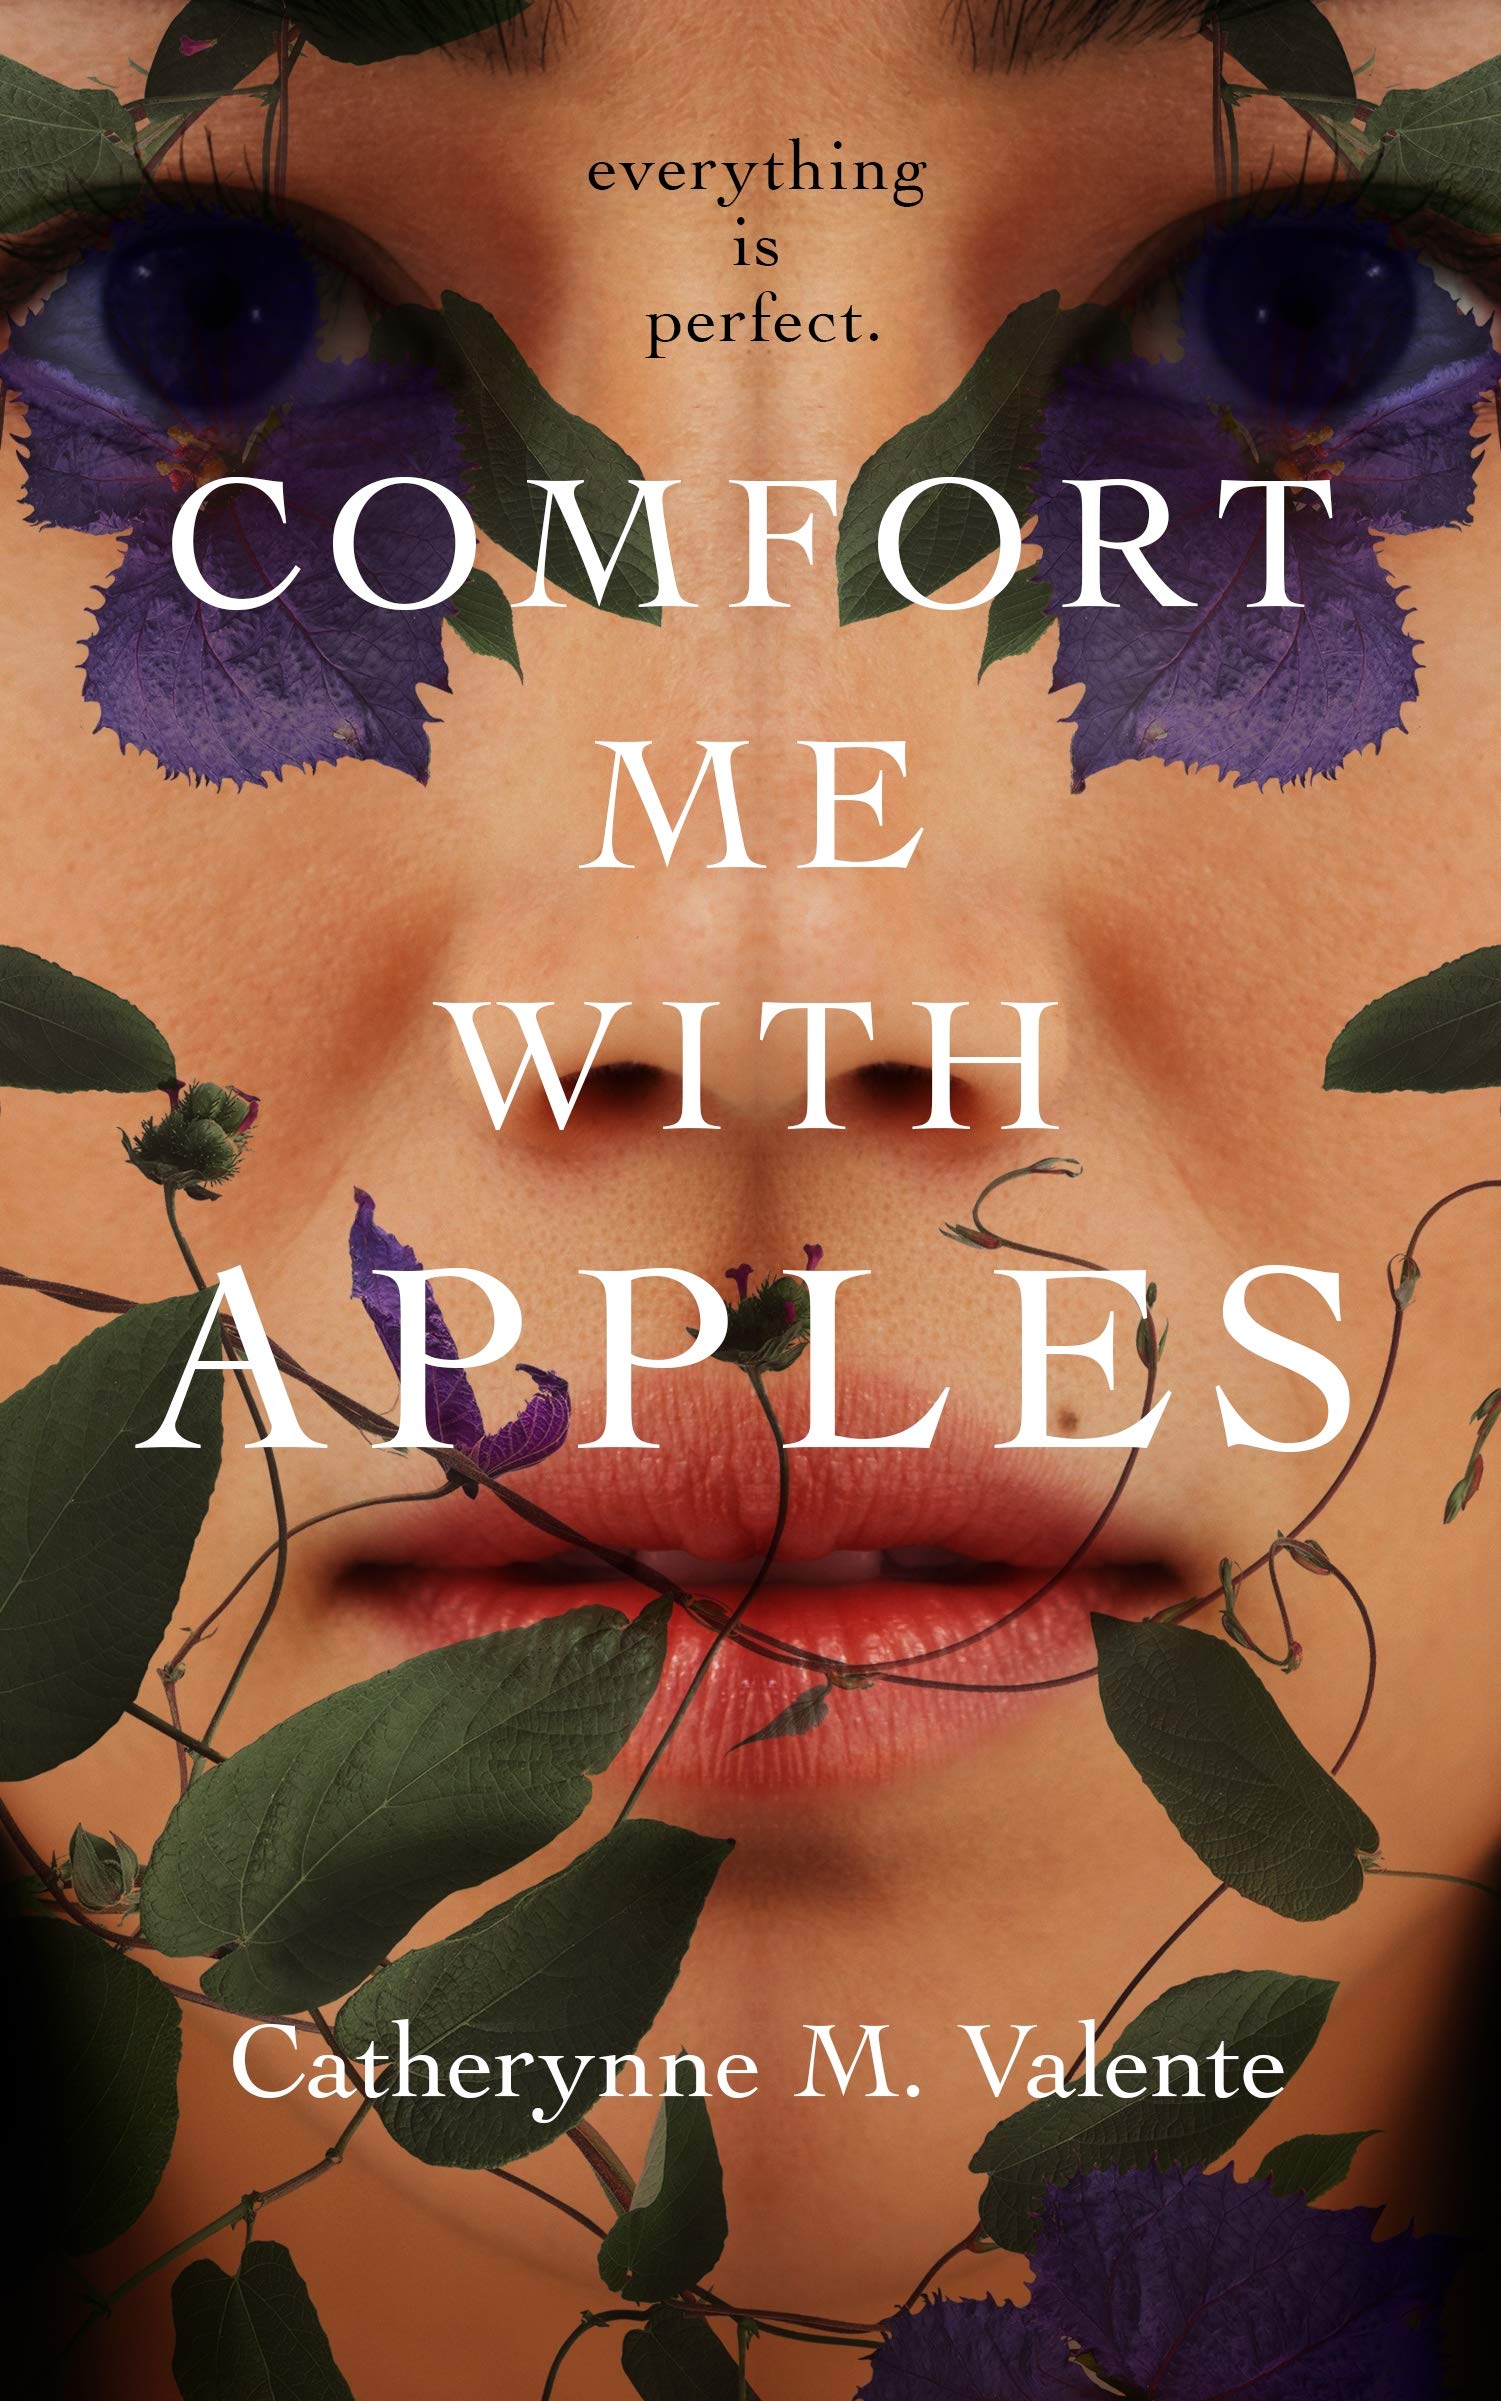 Virtual event with Catherynne Valente/Comfort Me With Apples